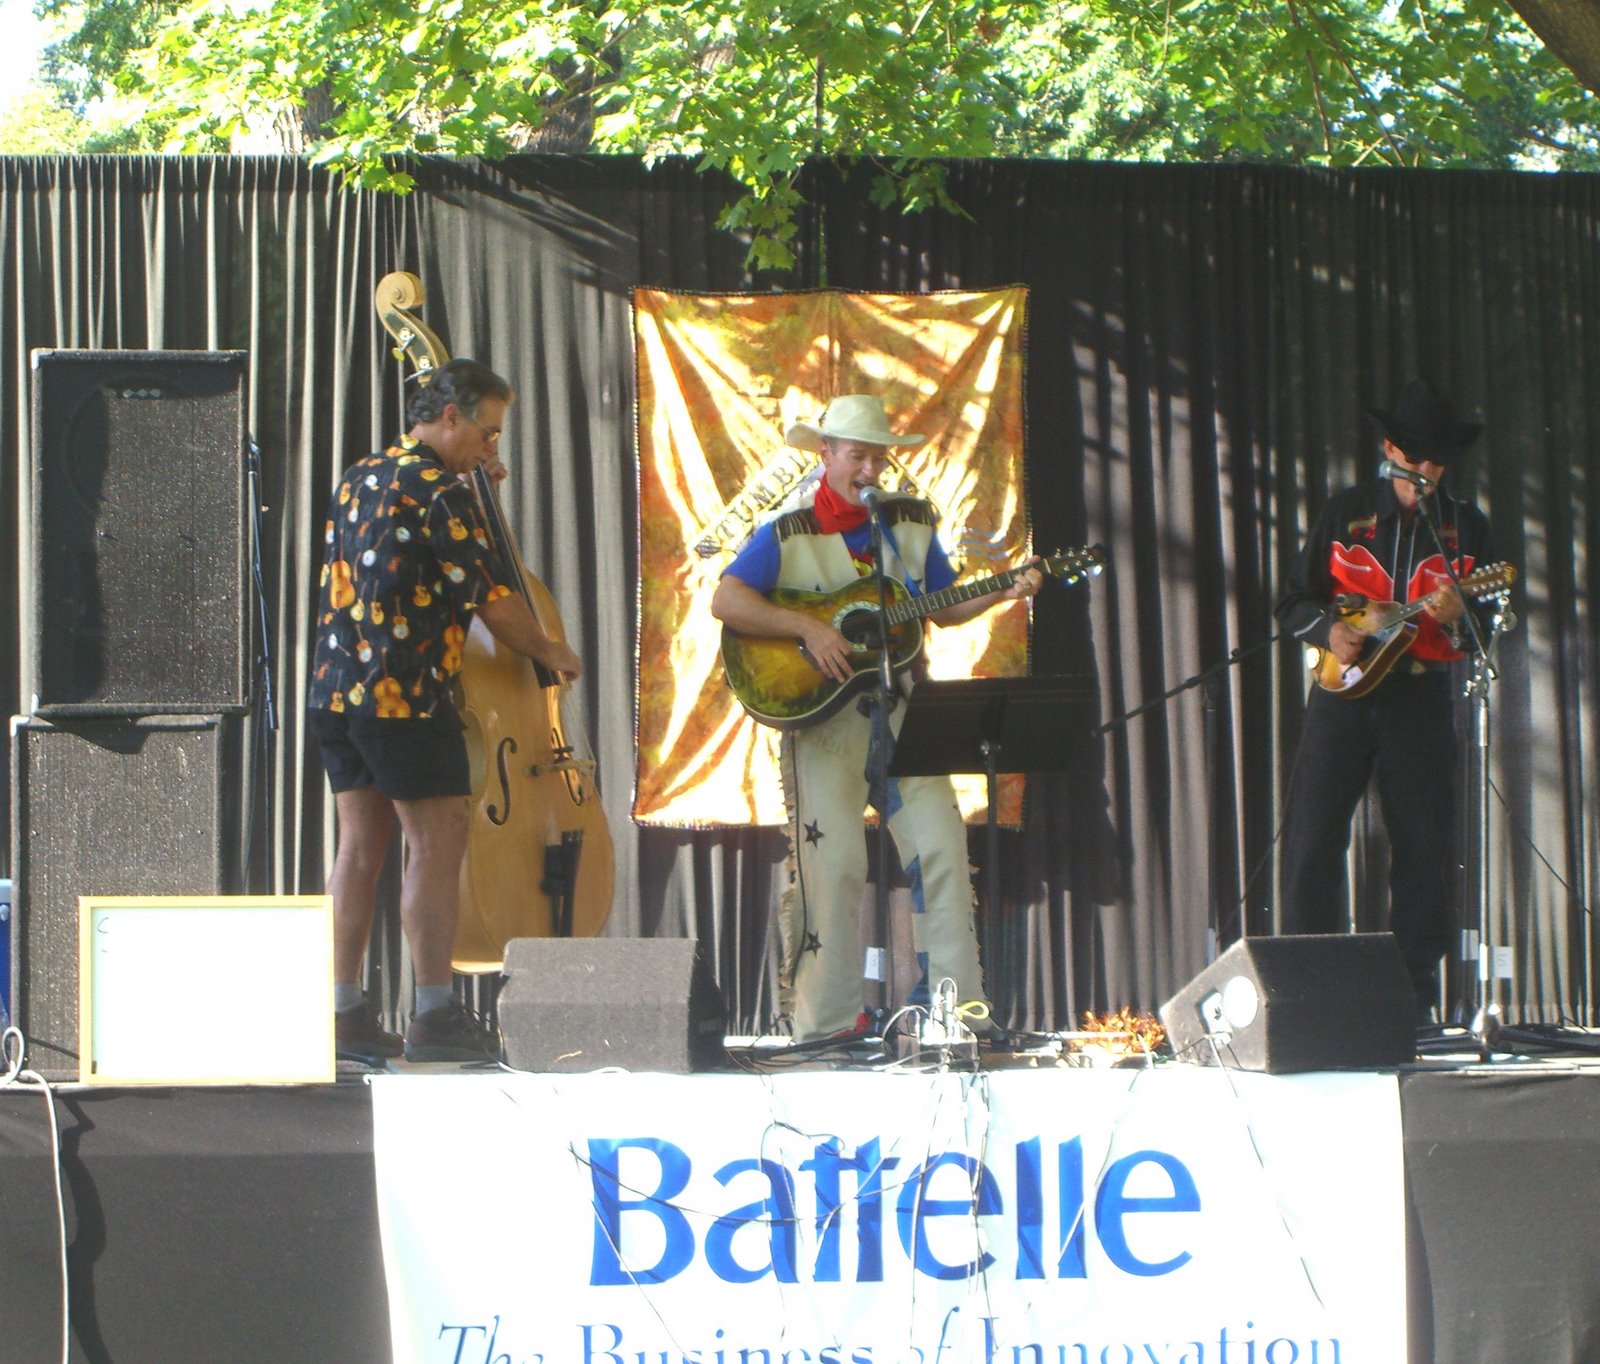 [Songwriting+Contest+Performance+Tumblweed+Fest+2007.jpg]